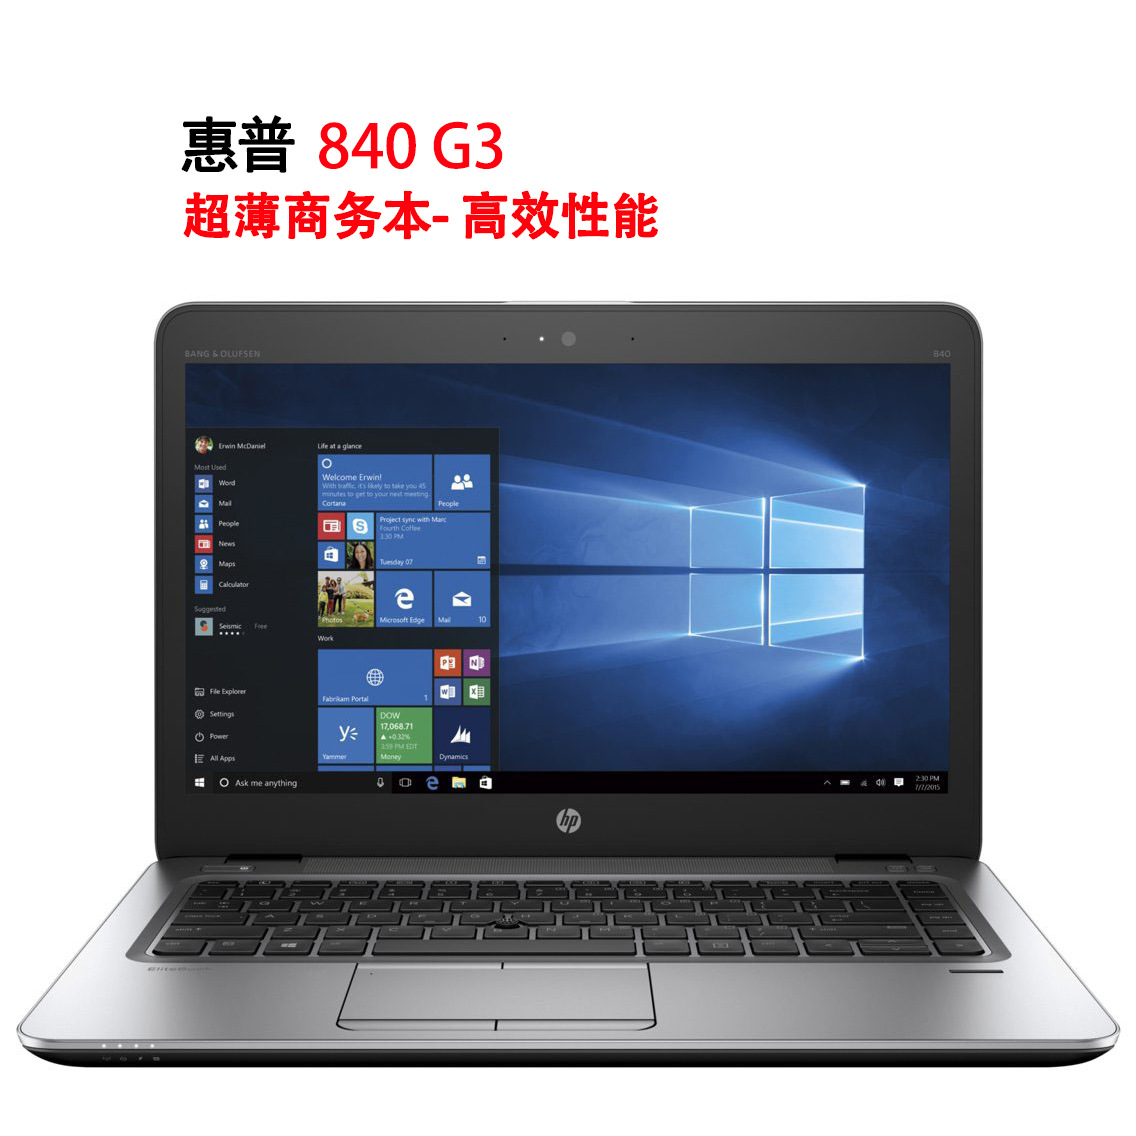 Suitable for HP/hp 840 G3 second-hand la...